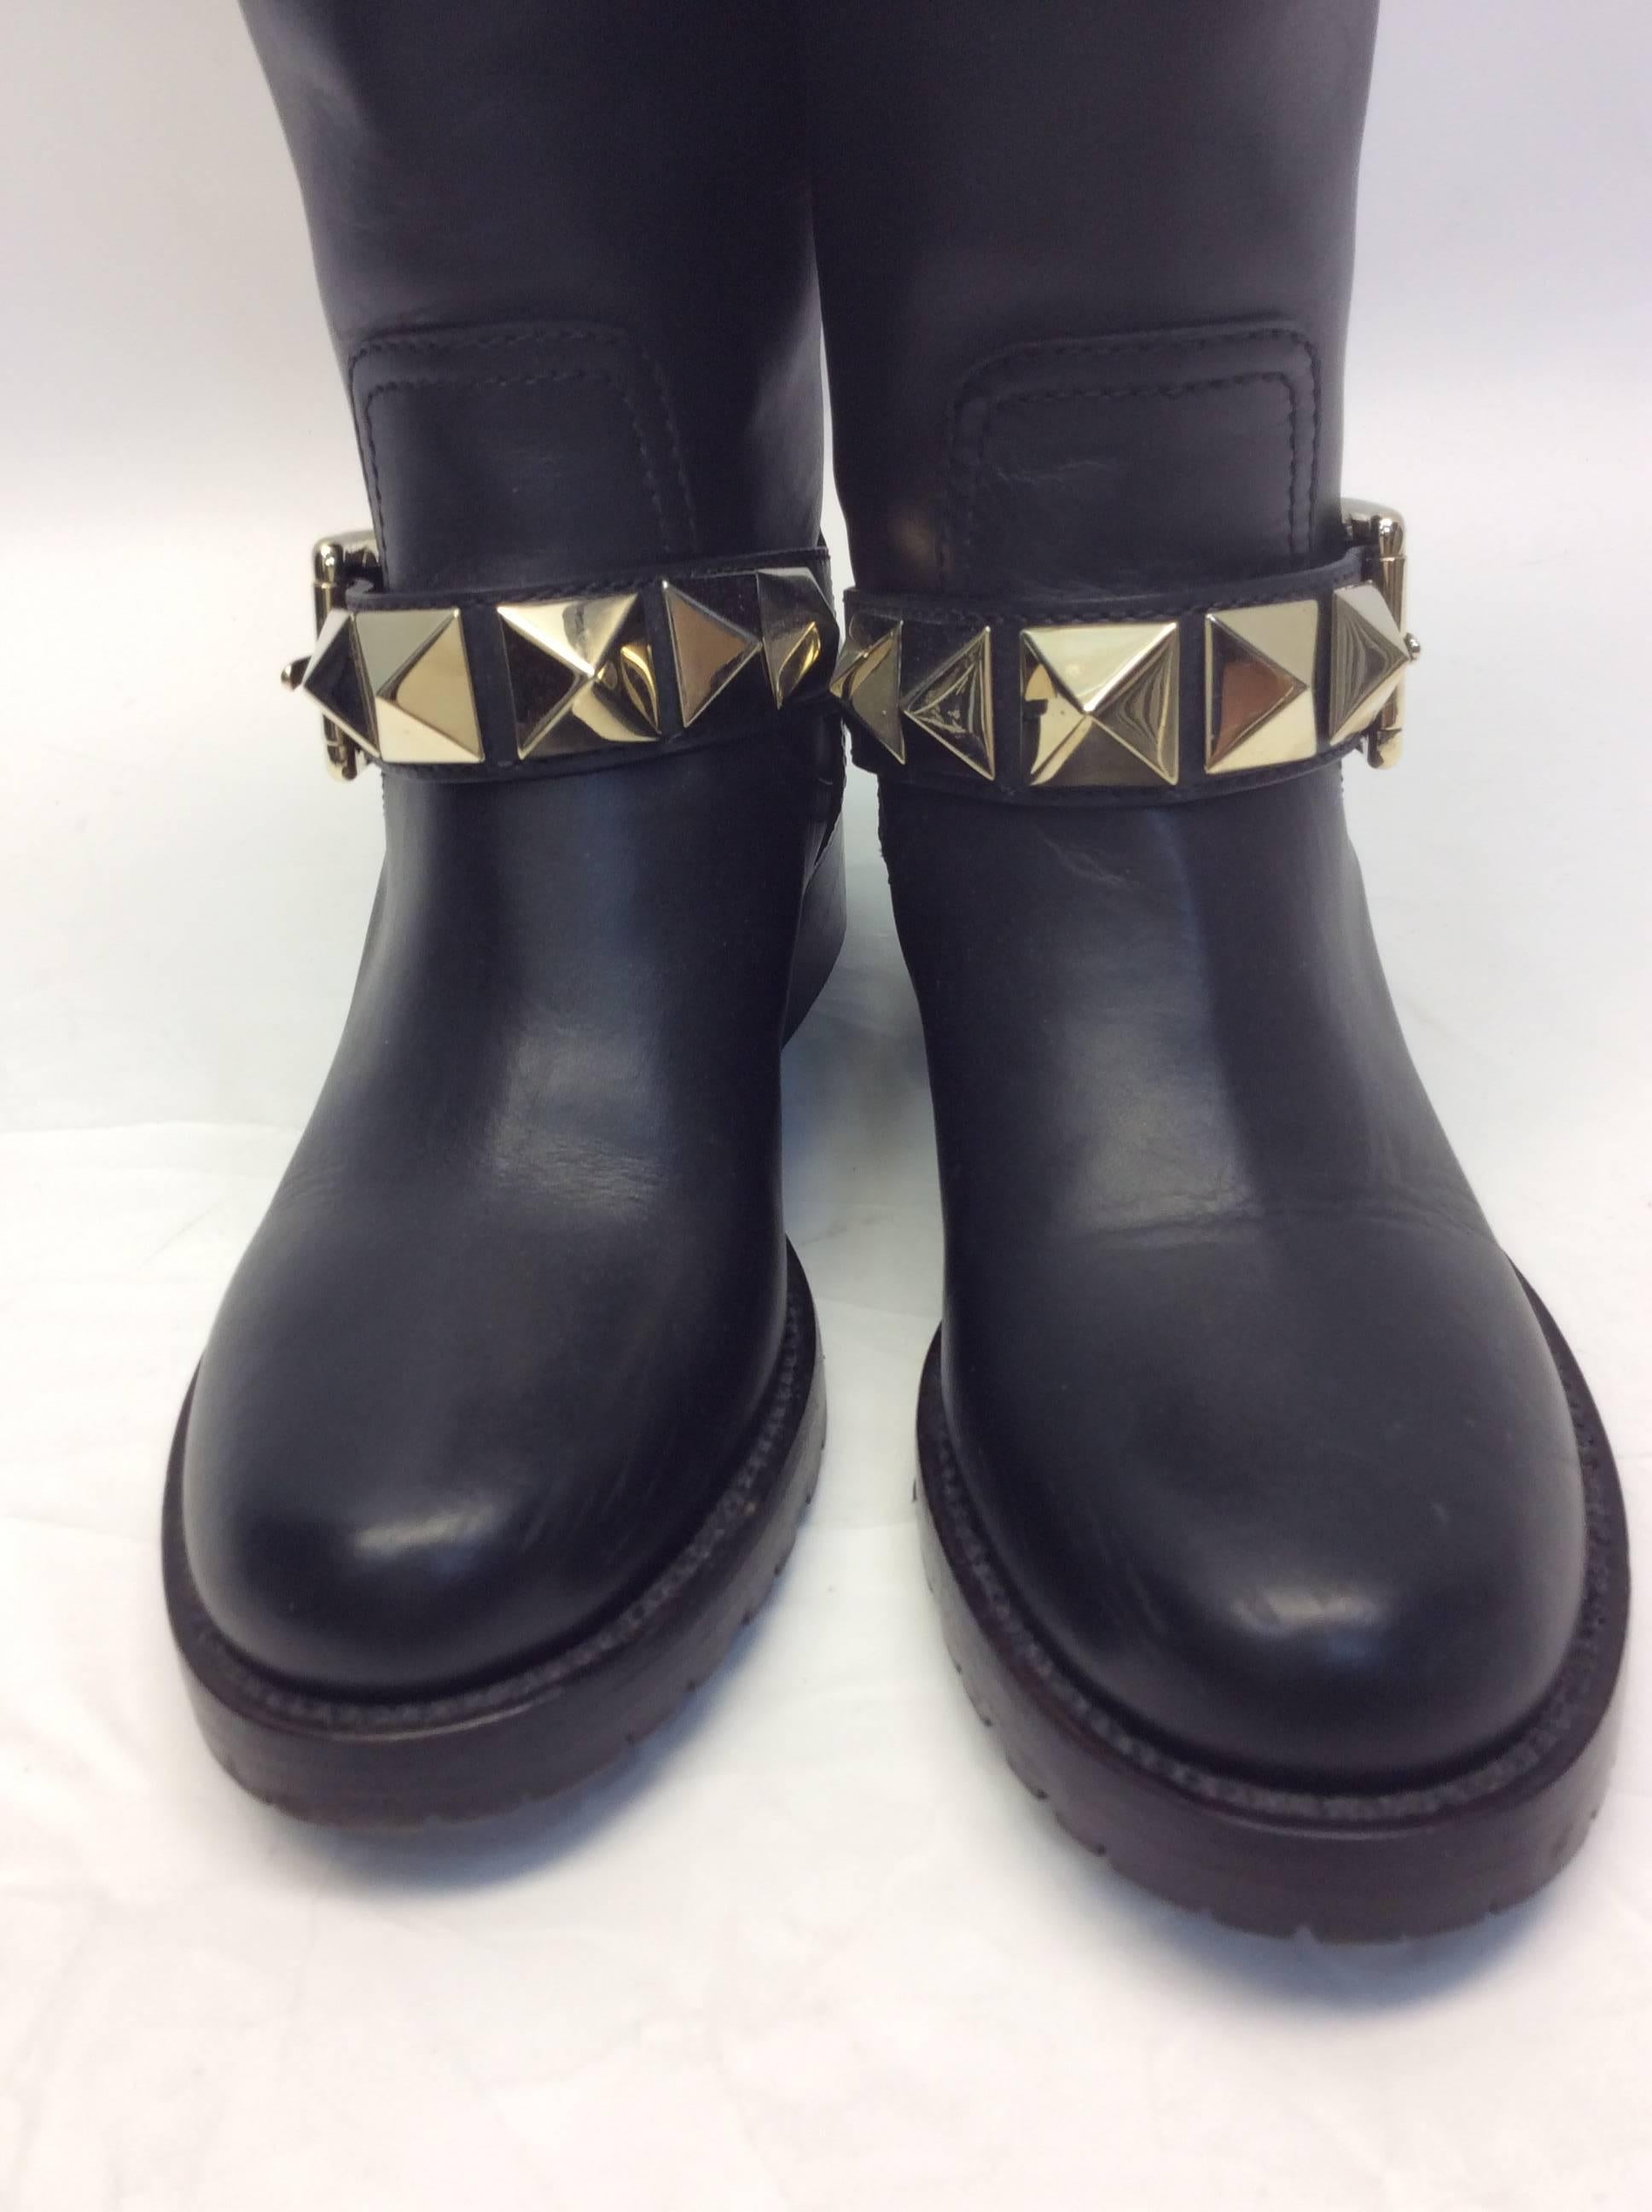 Valentino Leather Moto Studded Boots
Size 35.5 
12 inch boot shaft to heel
One inch heel
$550
Studded detail
